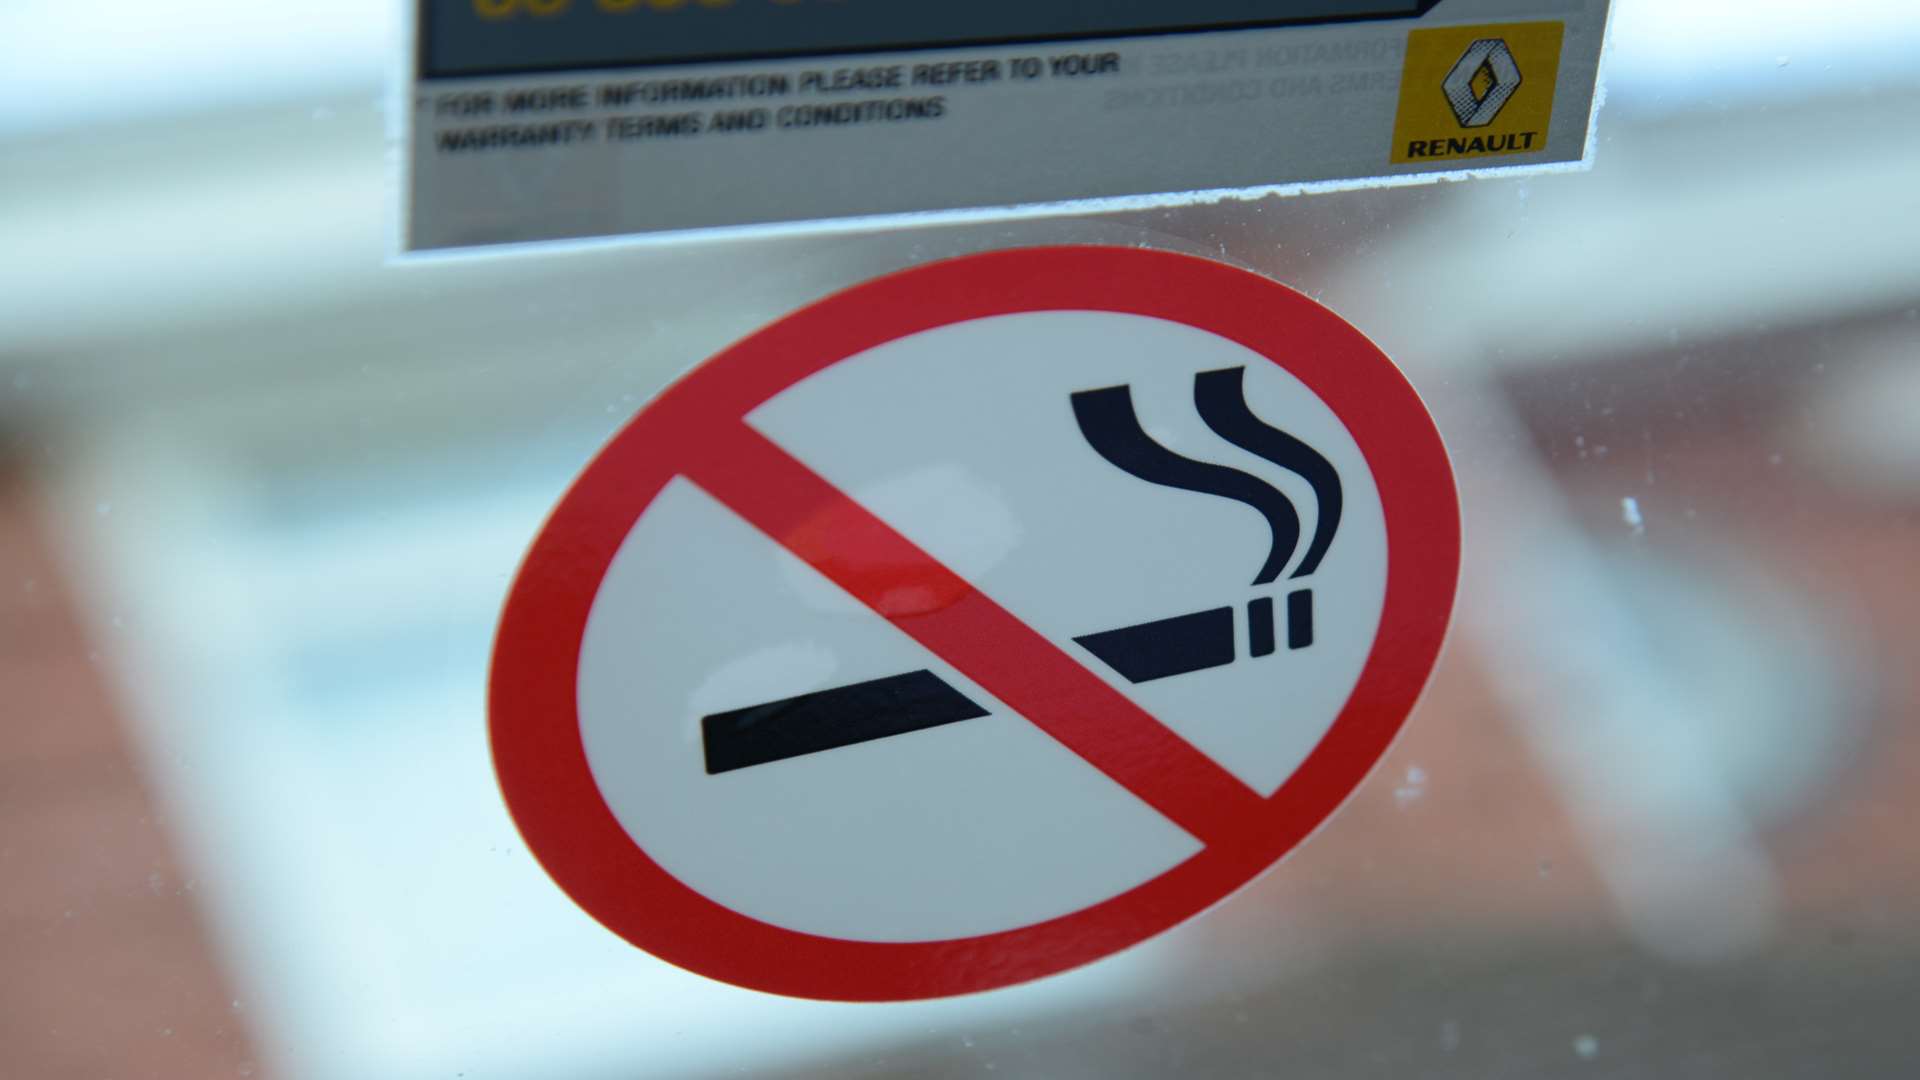 It's the law that you must put a no smoking sign in a work van